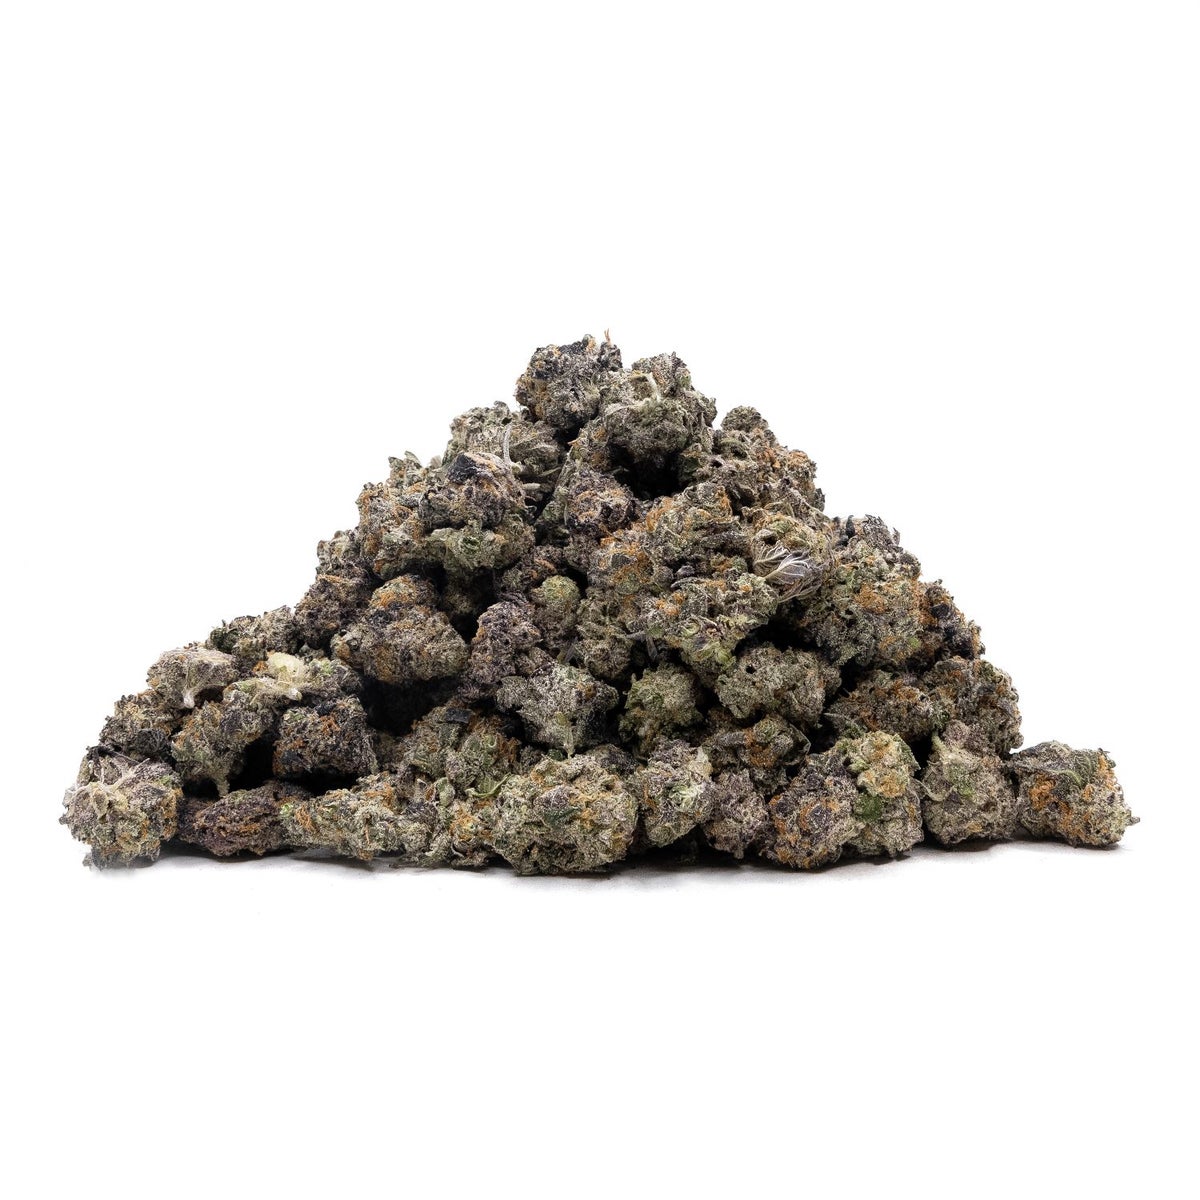 a pile of small appleicious buds, dark forest green with deep purple throughout, hints of orange pistols covered with trichomes